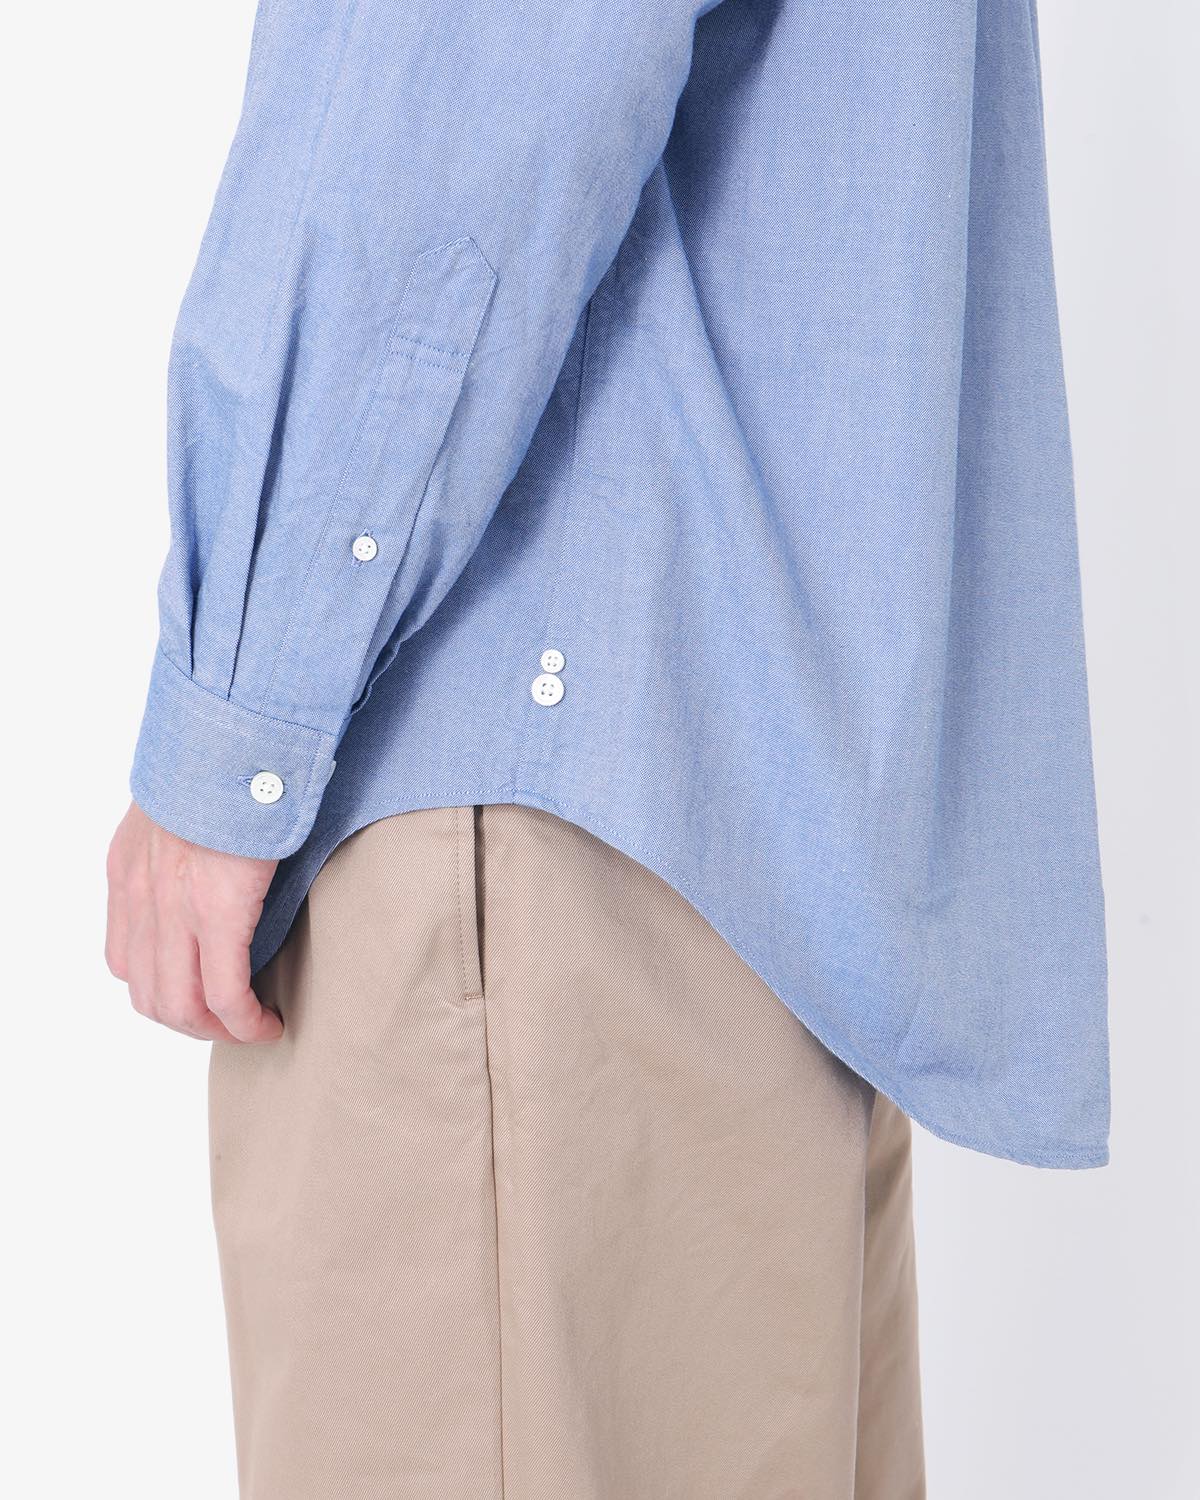 UNLIKELY BUTTON DOWN SHIRT